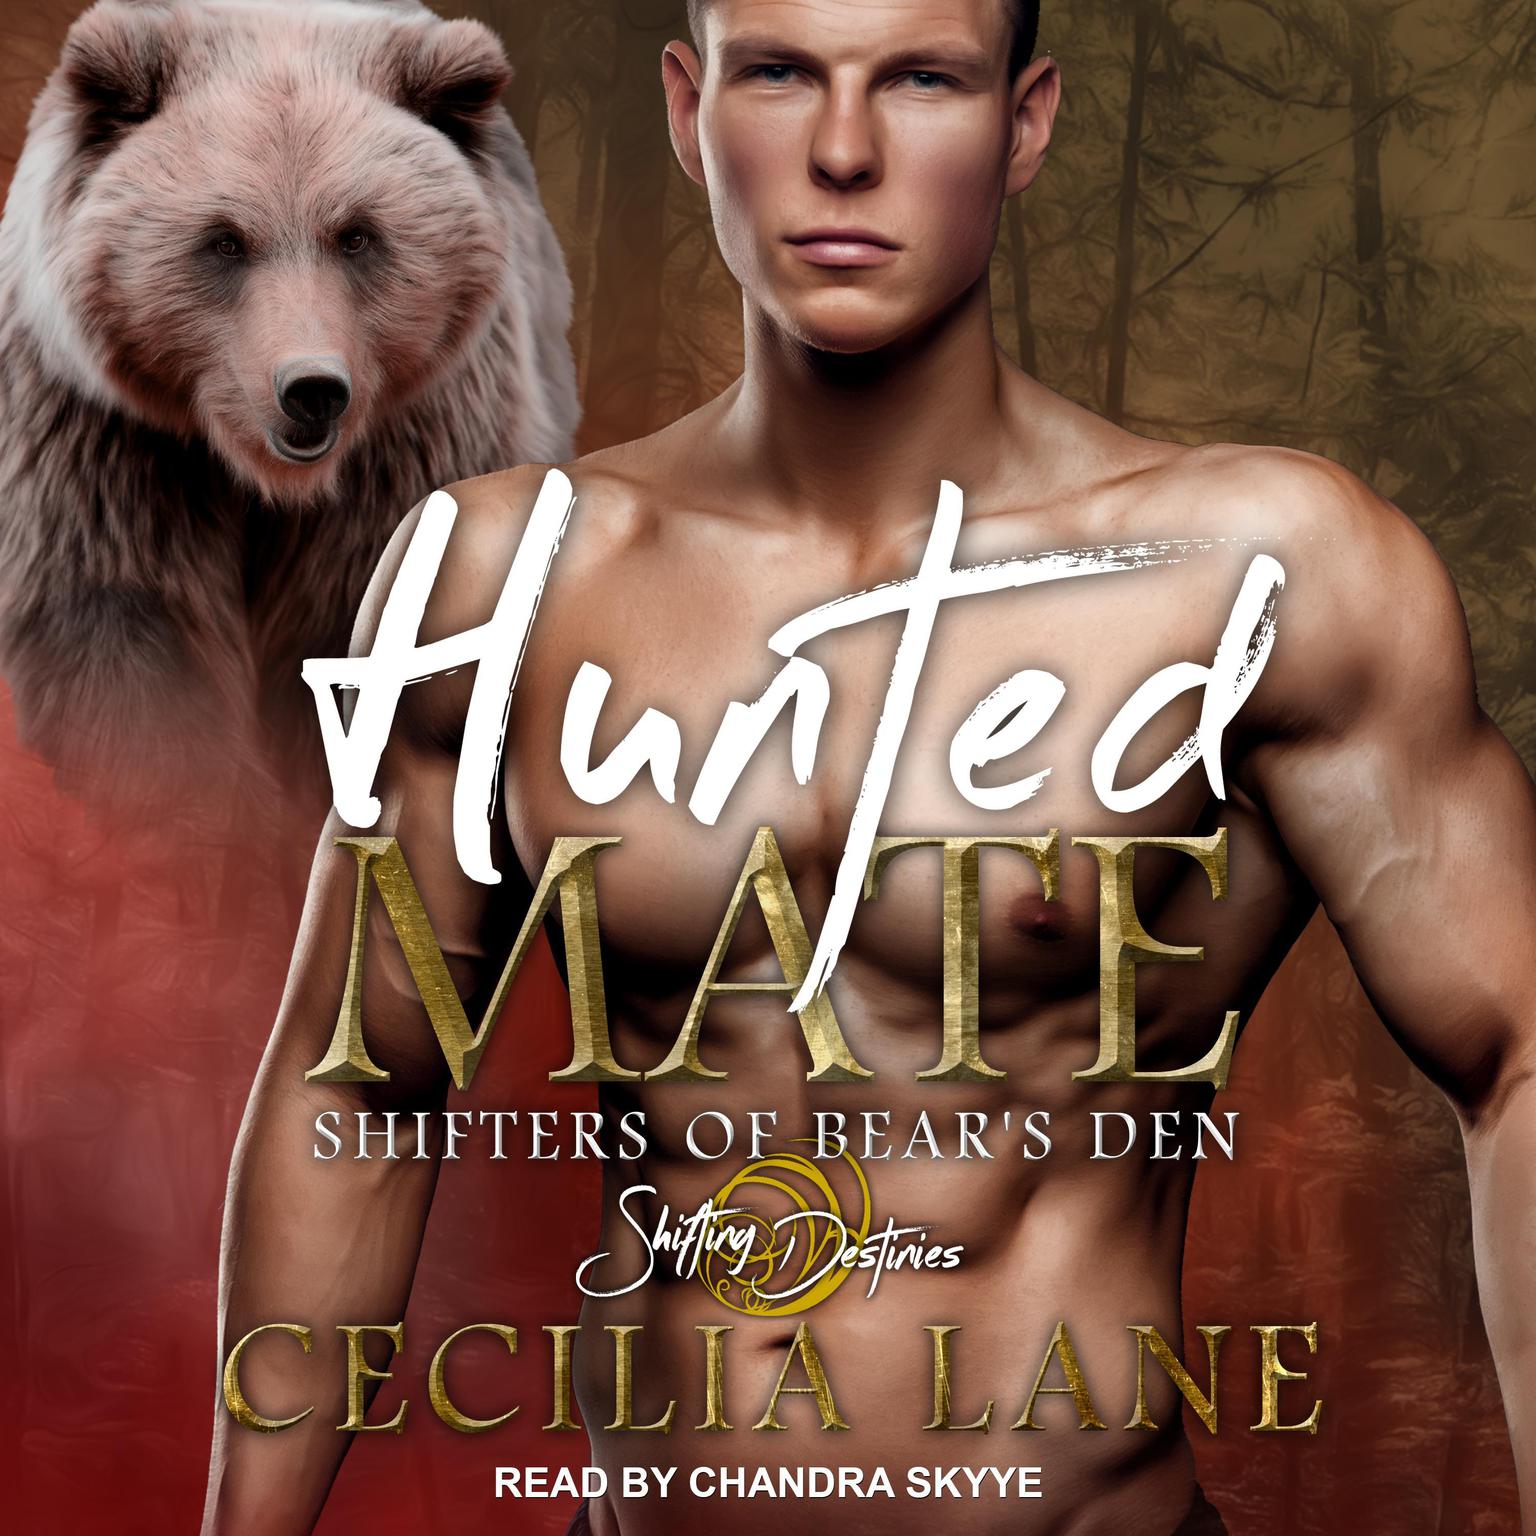 Hunted Mate: A Shifting Destinies Romance Audiobook, by Cecilia Lane